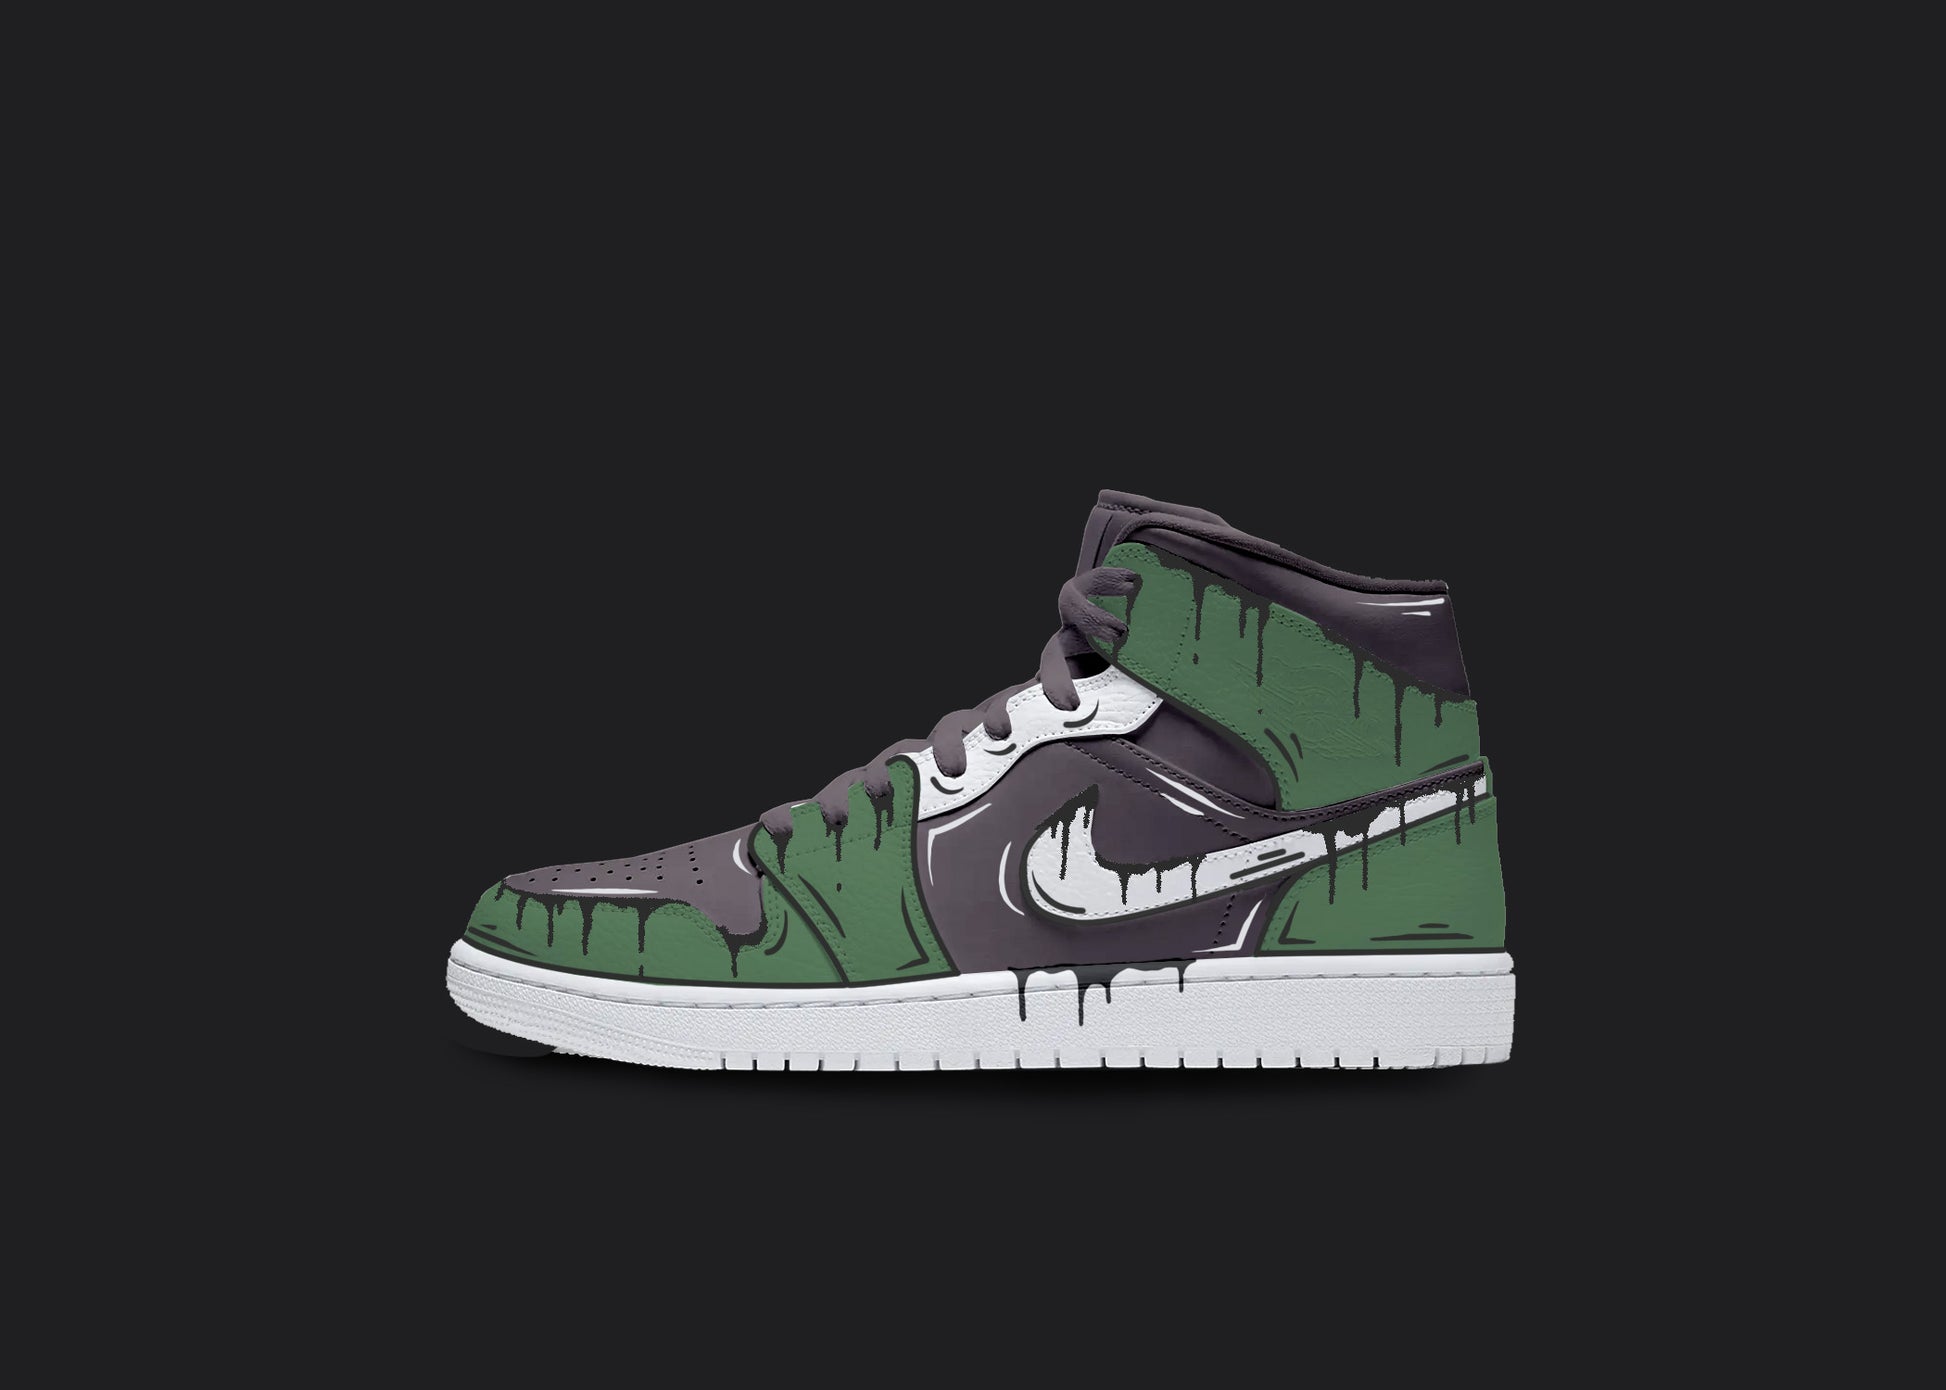 The image is featuring a custom black Air Jordan 1 sneaker on a blank black background. The white jordan sneaker has a custom green and purple cartoon design all over the sneaker. 